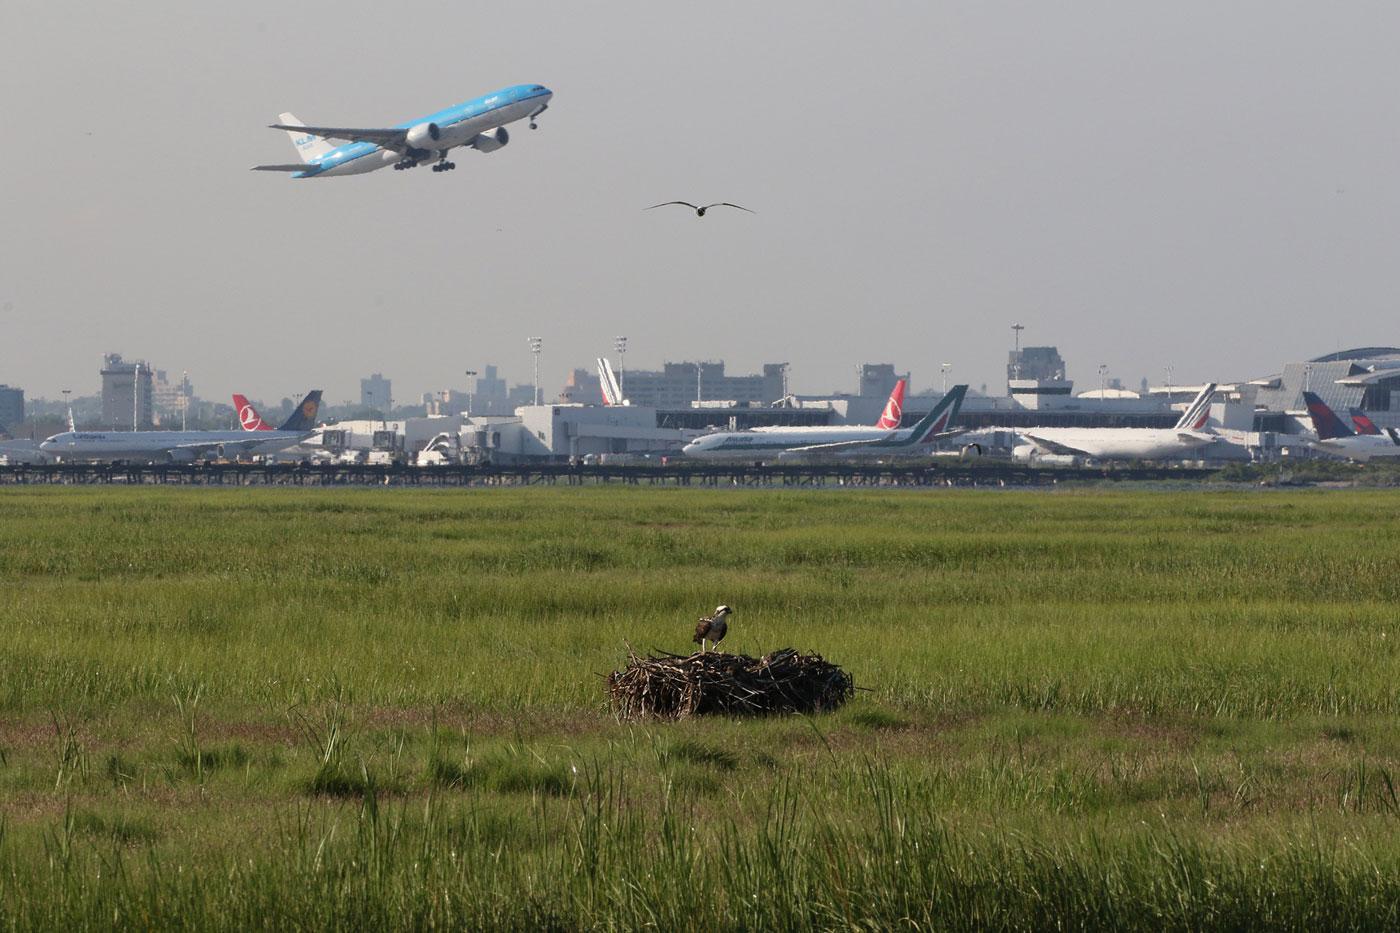 A nesting osprey shares the sky with planes from New York City's John F. Kennedy Airport. Photo: Don Riepe / American Littoral Society